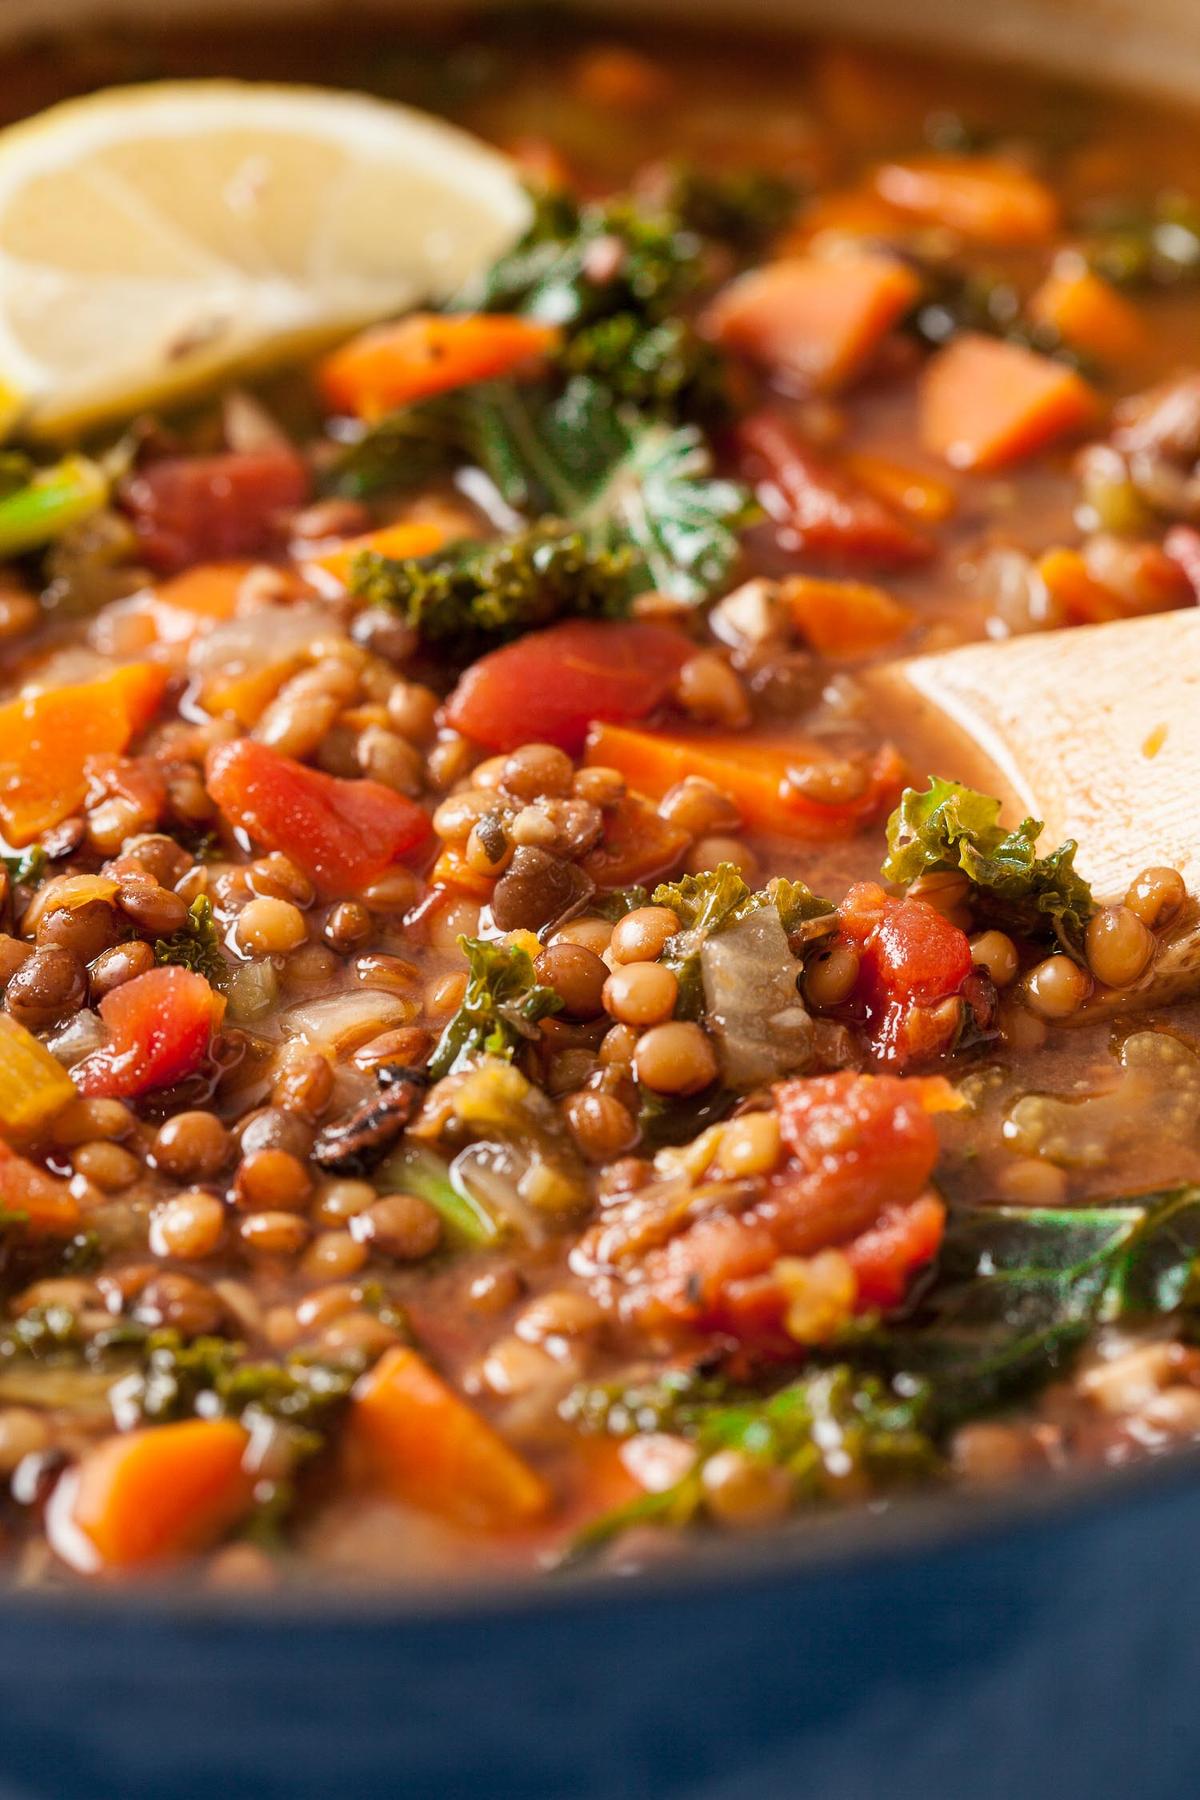 Packed full of vegetables, lentil soup is a healthy comfort food recipe. (Courtesy of Amy Dong)